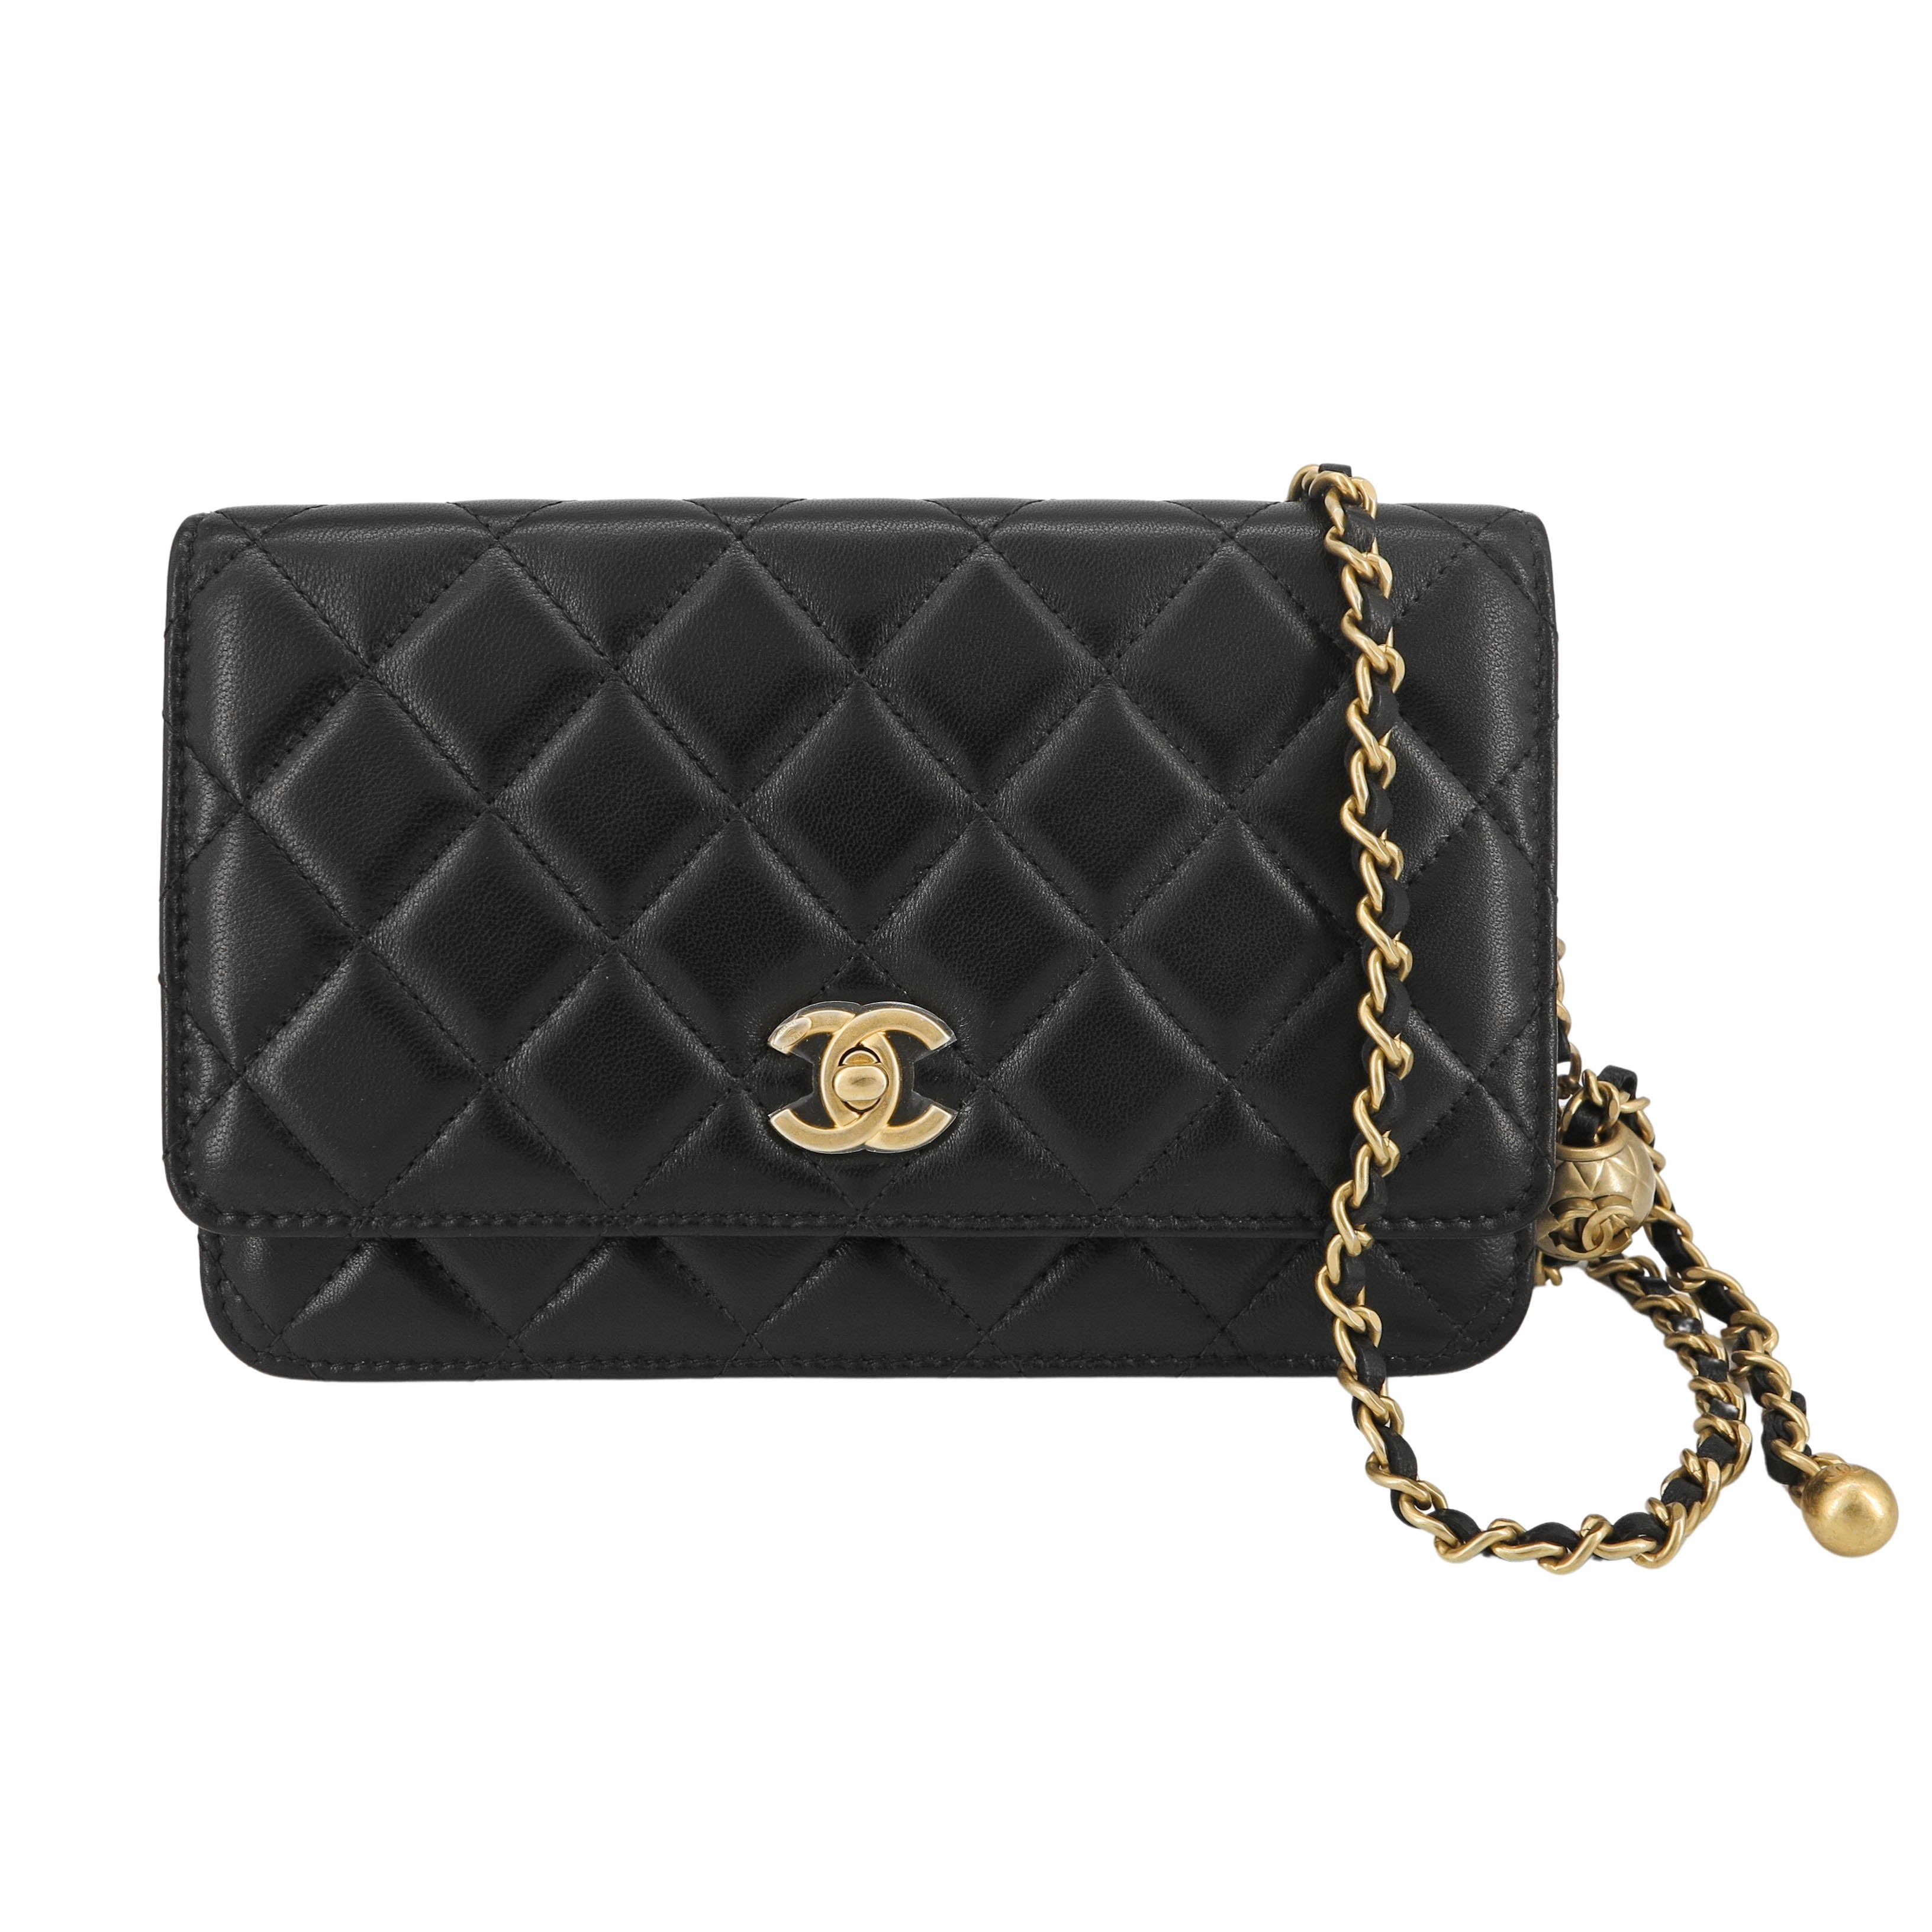 Chanel CHANEL 19 Shiny Lambskin Zip-Around Coin Purse with Gold Hardware ( Wallets and Small Leather Goods,Wallets)